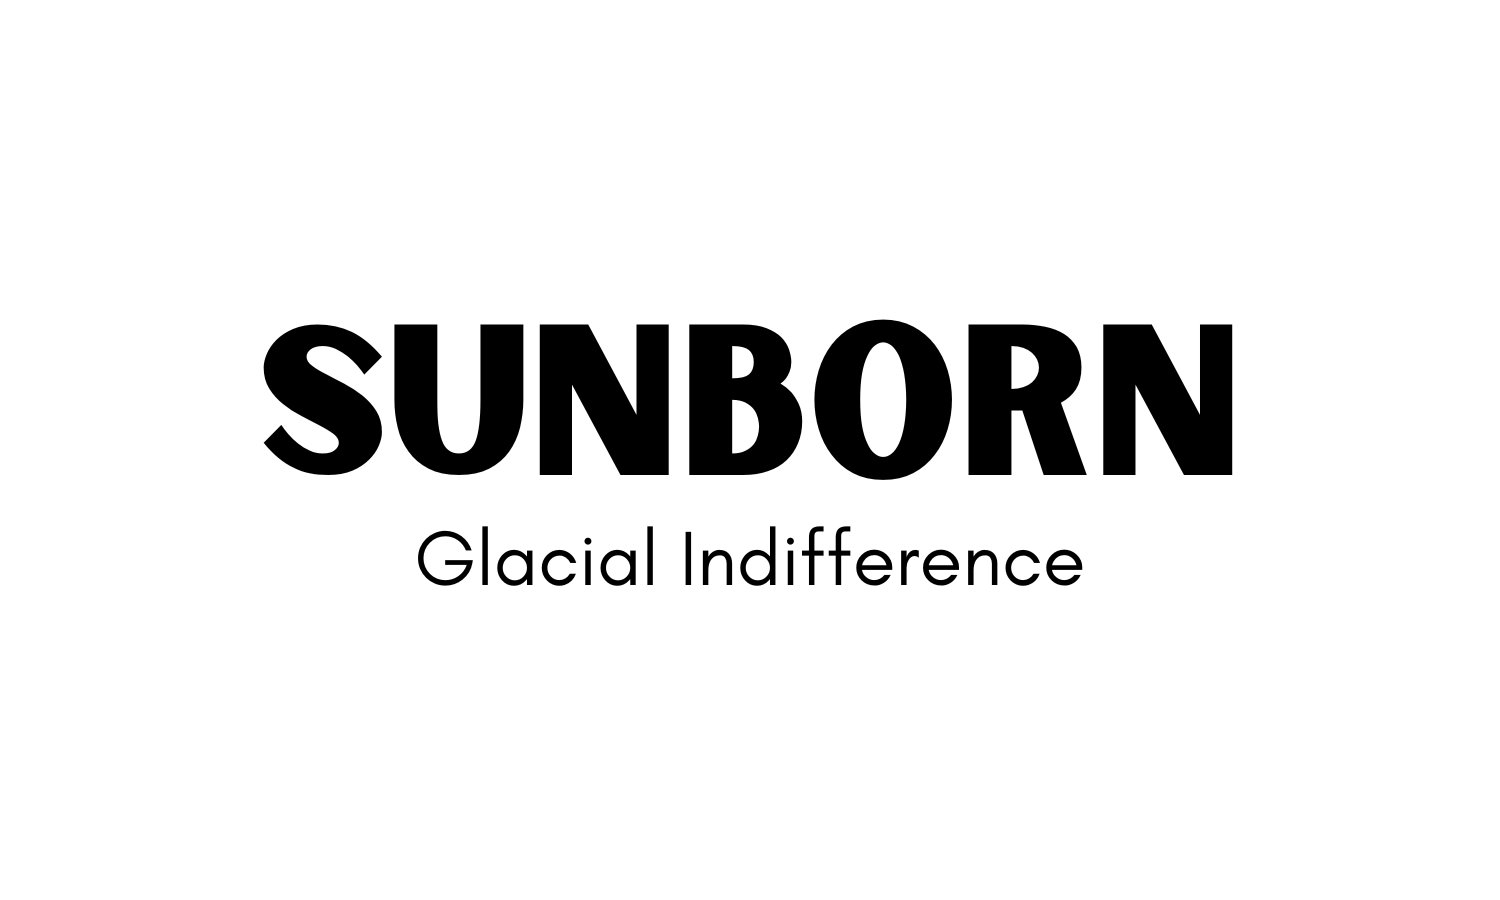 sunborn glacial indifference font 